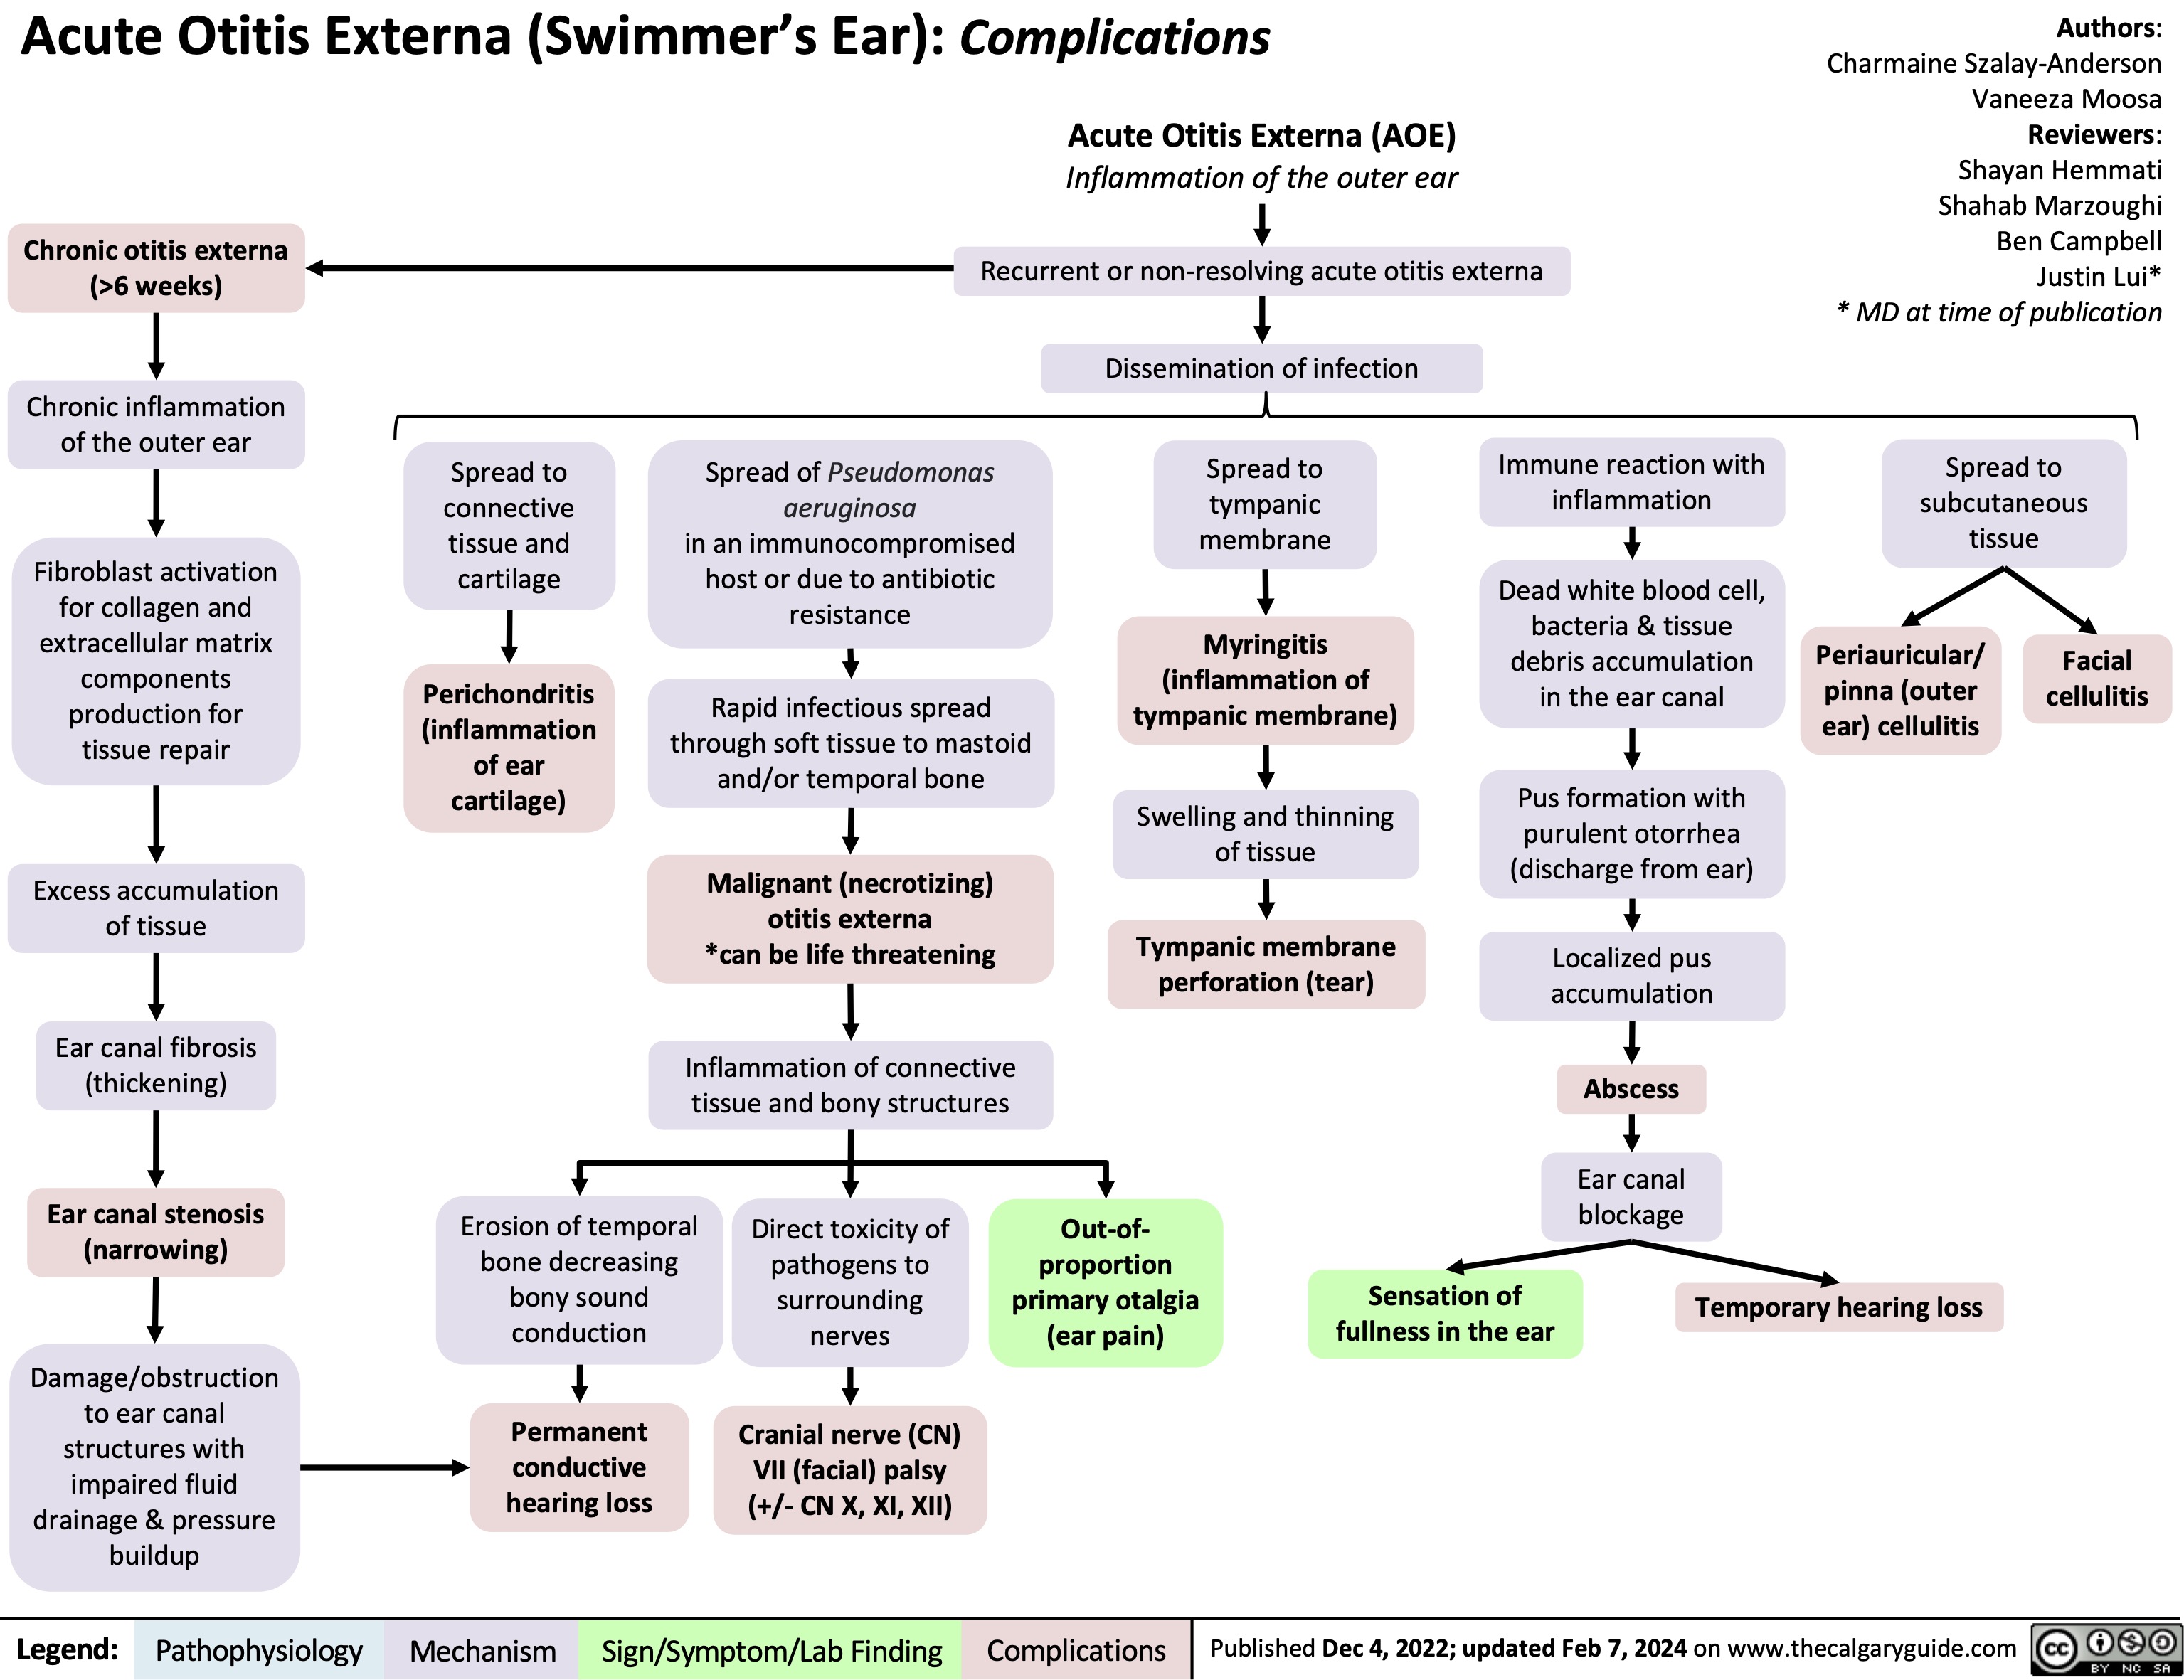 Acute Otitis Externa (Swimmer’s Ear): Complications
Acute Otitis Externa (AOE)
Authors: Charmaine Szalay-Anderson Vaneeza Moosa Reviewers: Shayan Hemmati Shahab Marzoughi Ben Campbell Justin Lui* * MD at time of publication
Spread to subcutaneous tissue
 Chronic otitis externa (>6 weeks)
Chronic inflammation of the outer ear
Fibroblast activation for collagen and extracellular matrix components production for tissue repair
Excess accumulation of tissue
Ear canal fibrosis (thickening)
Ear canal stenosis (narrowing)
Damage/obstruction to ear canal structures with impaired fluid drainage & pressure buildup
Inflammation of the outer ear
Recurrent or non-resolving acute otitis externa Dissemination of infection
          Spread to connective tissue and cartilage
Perichondritis (inflammation of ear cartilage)
Spread of Pseudomonas aeruginosa
in an immunocompromised host or due to antibiotic resistance
Rapid infectious spread through soft tissue to mastoid and/or temporal bone
Malignant (necrotizing) otitis externa *can be life threatening
Inflammation of connective tissue and bony structures
Spread to
tympanic membrane
Myringitis (inflammation of tympanic membrane)
Swelling and thinning of tissue
Tympanic membrane perforation (tear)
Immune reaction with inflammation
Dead white blood cell, bacteria & tissue debris accumulation in the ear canal
Pus formation with purulent otorrhea (discharge from ear)
Localized pus accumulation
Abscess
Ear canal blockage
Periauricular/ pinna (outer ear) cellulitis
Facial cellulitis
                       Erosion of temporal bone decreasing bony sound conduction
Permanent conductive hearing loss
Direct toxicity of pathogens to surrounding nerves
Cranial nerve (CN) VII (facial) palsy (+/- CN X, XI, XII)
Out-of- proportion primary otalgia (ear pain)
Sensation of fullness in the ear
Temporary hearing loss
        Legend:
 Pathophysiology
 Mechanism
 Sign/Symptom/Lab Finding
 Complications
 Published Dec 4, 2022; updated Feb 7, 2024 on www.thecalgaryguide.com
 